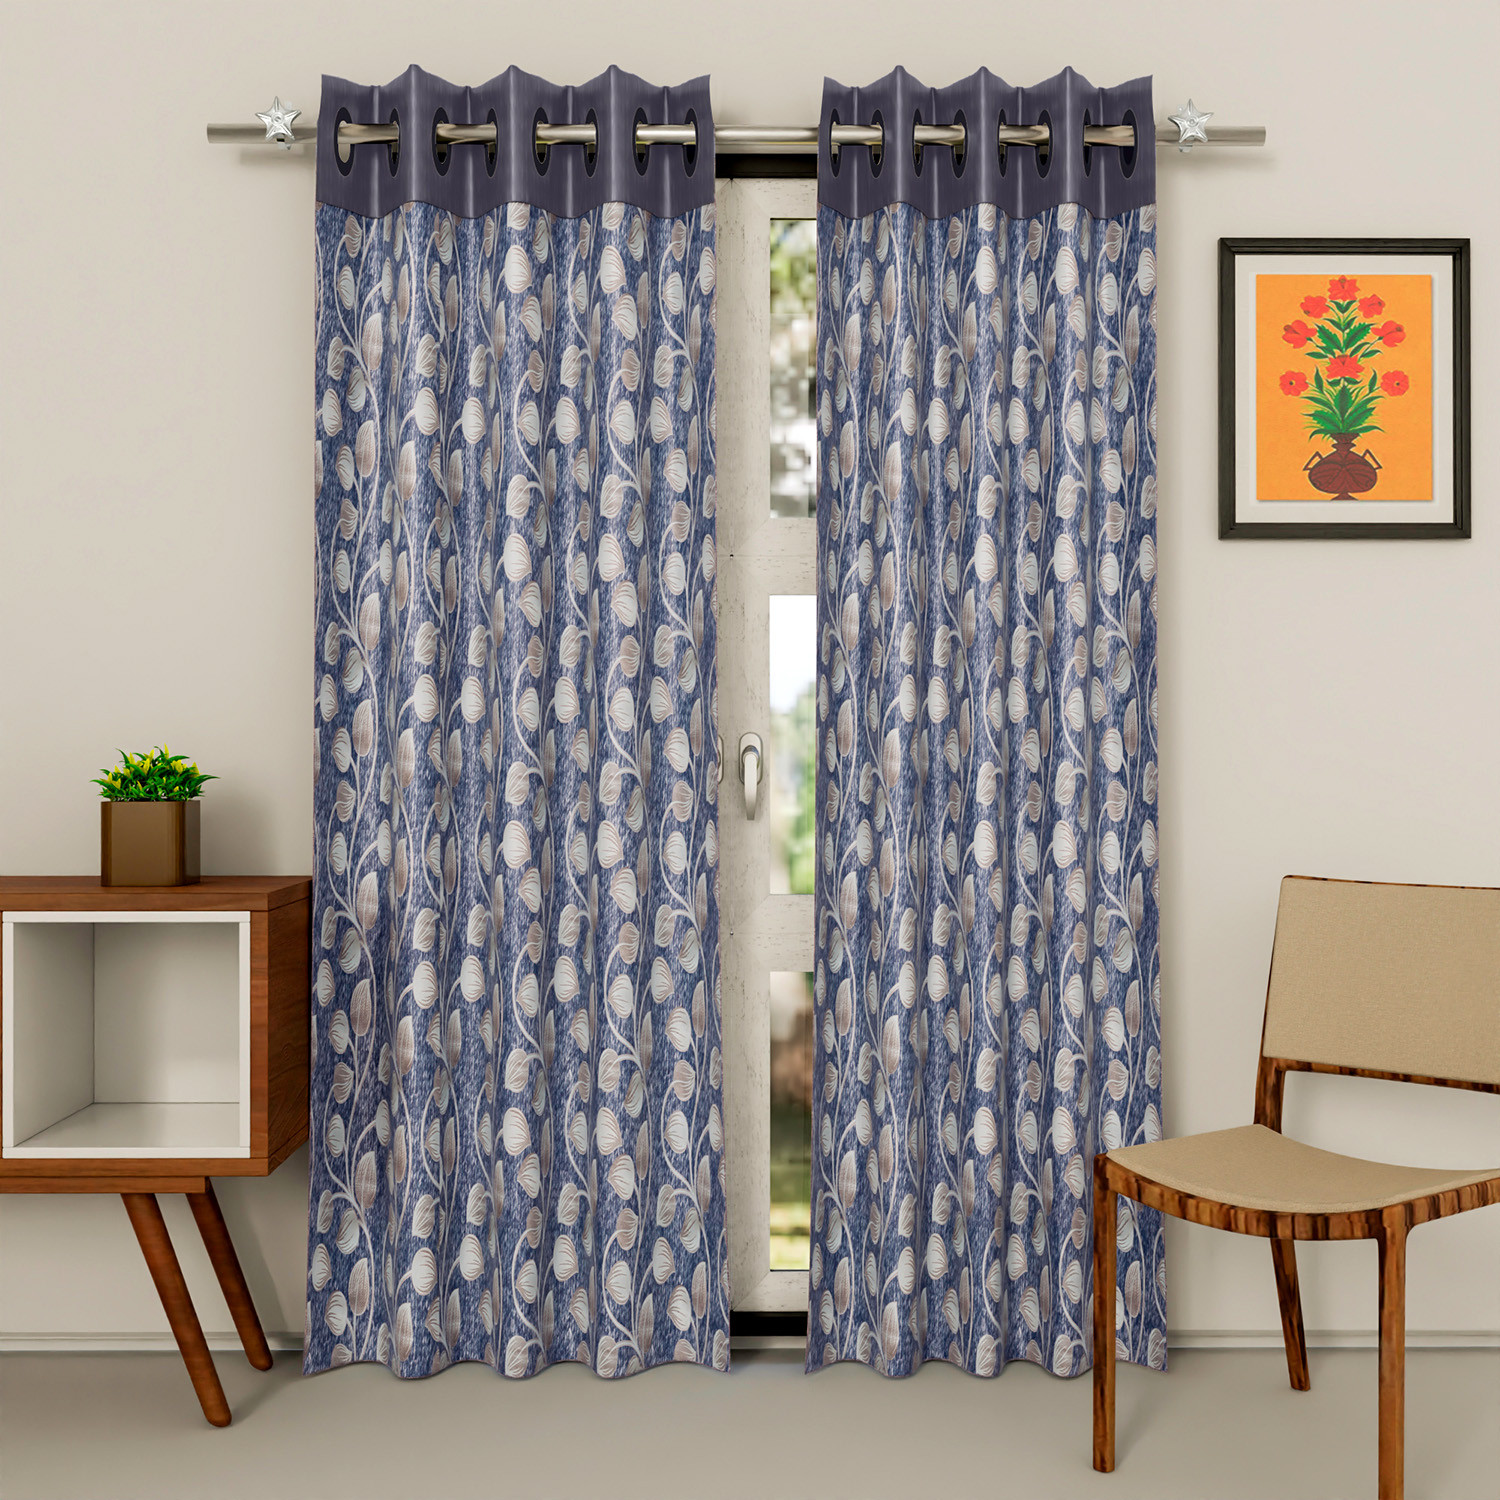 Kuber Industries Silk Decorative 9 Feet Long Door Curtain | Leaf Print Blackout Drapes Curtain With 8 Eyelet For Home & Office (Sky Blue)